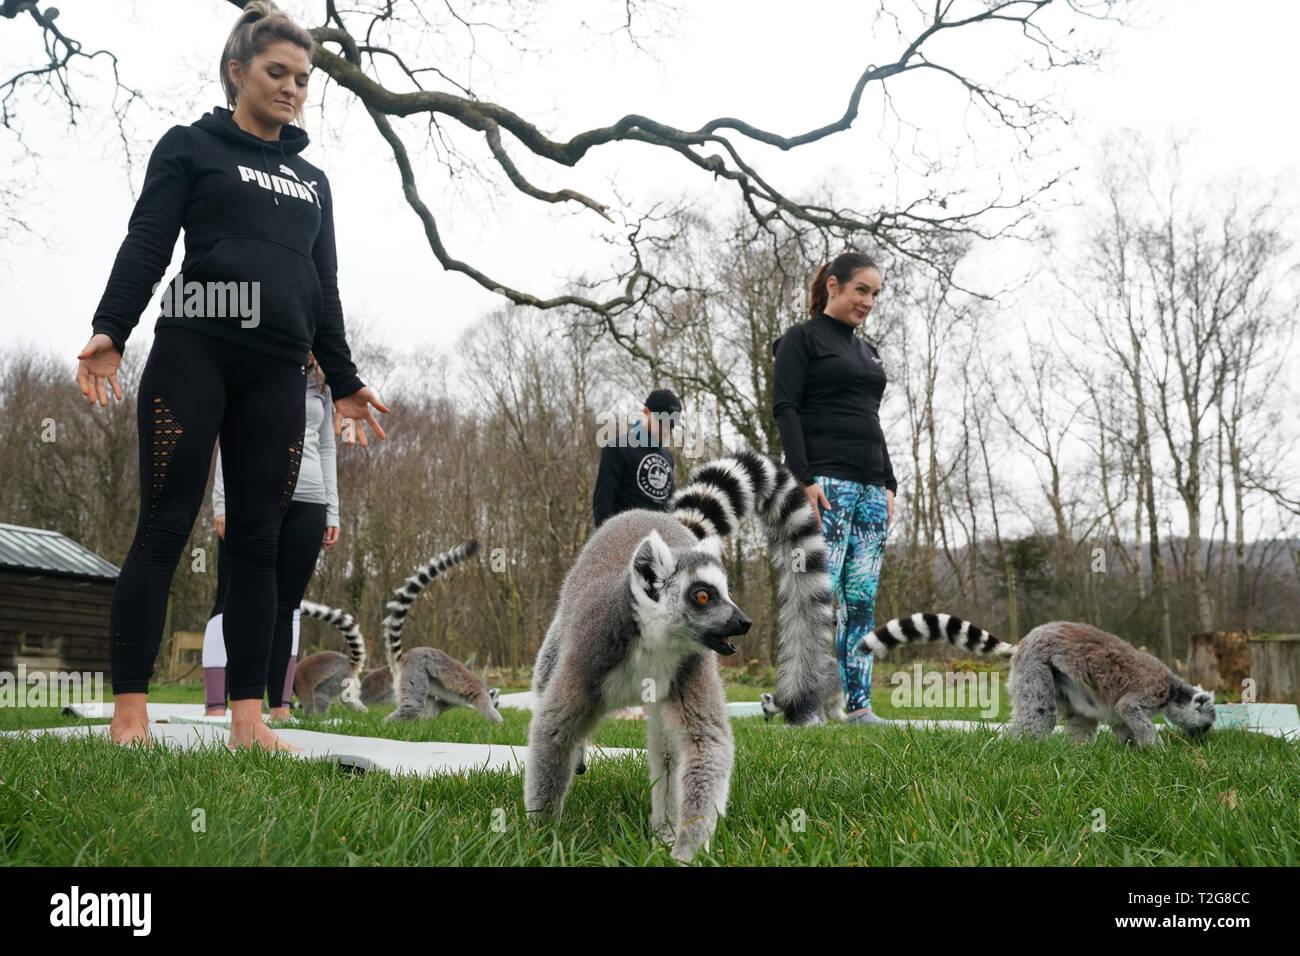 Armathwaite Hall hotel in Keswick, Cumbria holds Lemoga classes with the lemurs from Lake District Wild Life Park mingling with the class to create a personal yoga experience which aims to heighten the sense of wellbeing for both lemur and human. Stock Photo